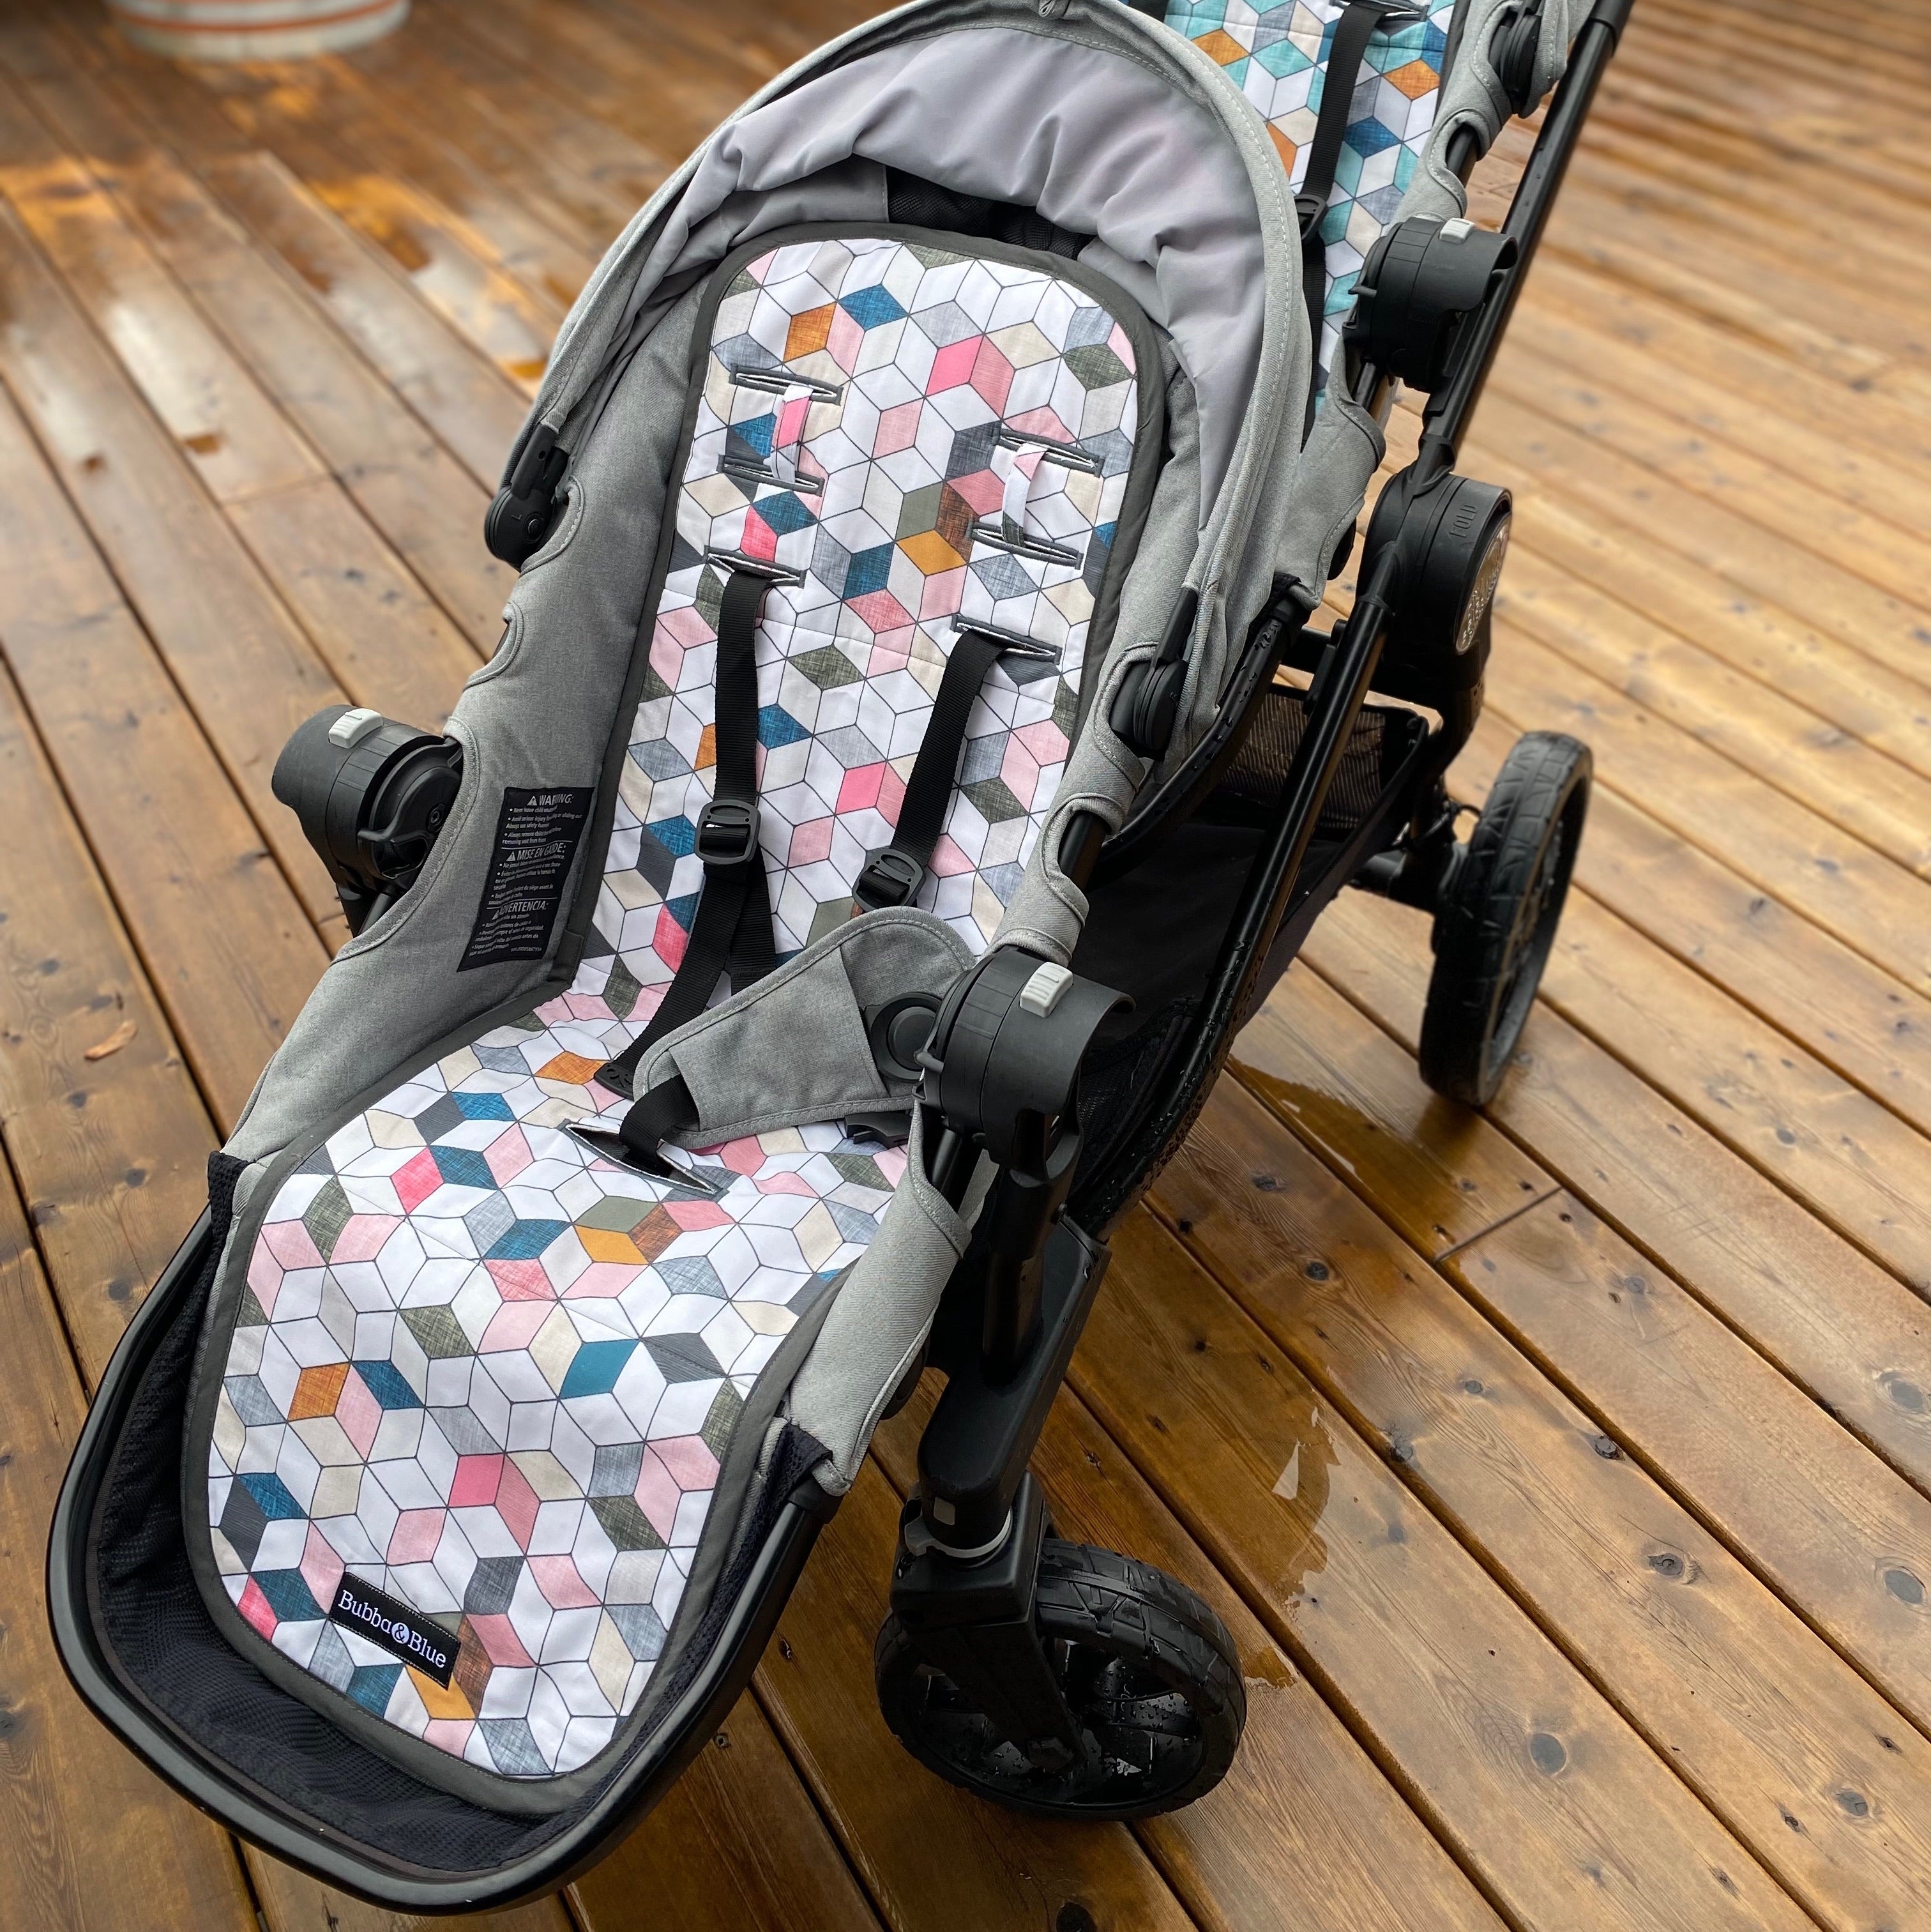 Stroller liner and foormuff set made to fit most strollers. Get a custom fit for a wide variety of strollers. These save your seat from wear and tear. This one is featured in the pink hex print.